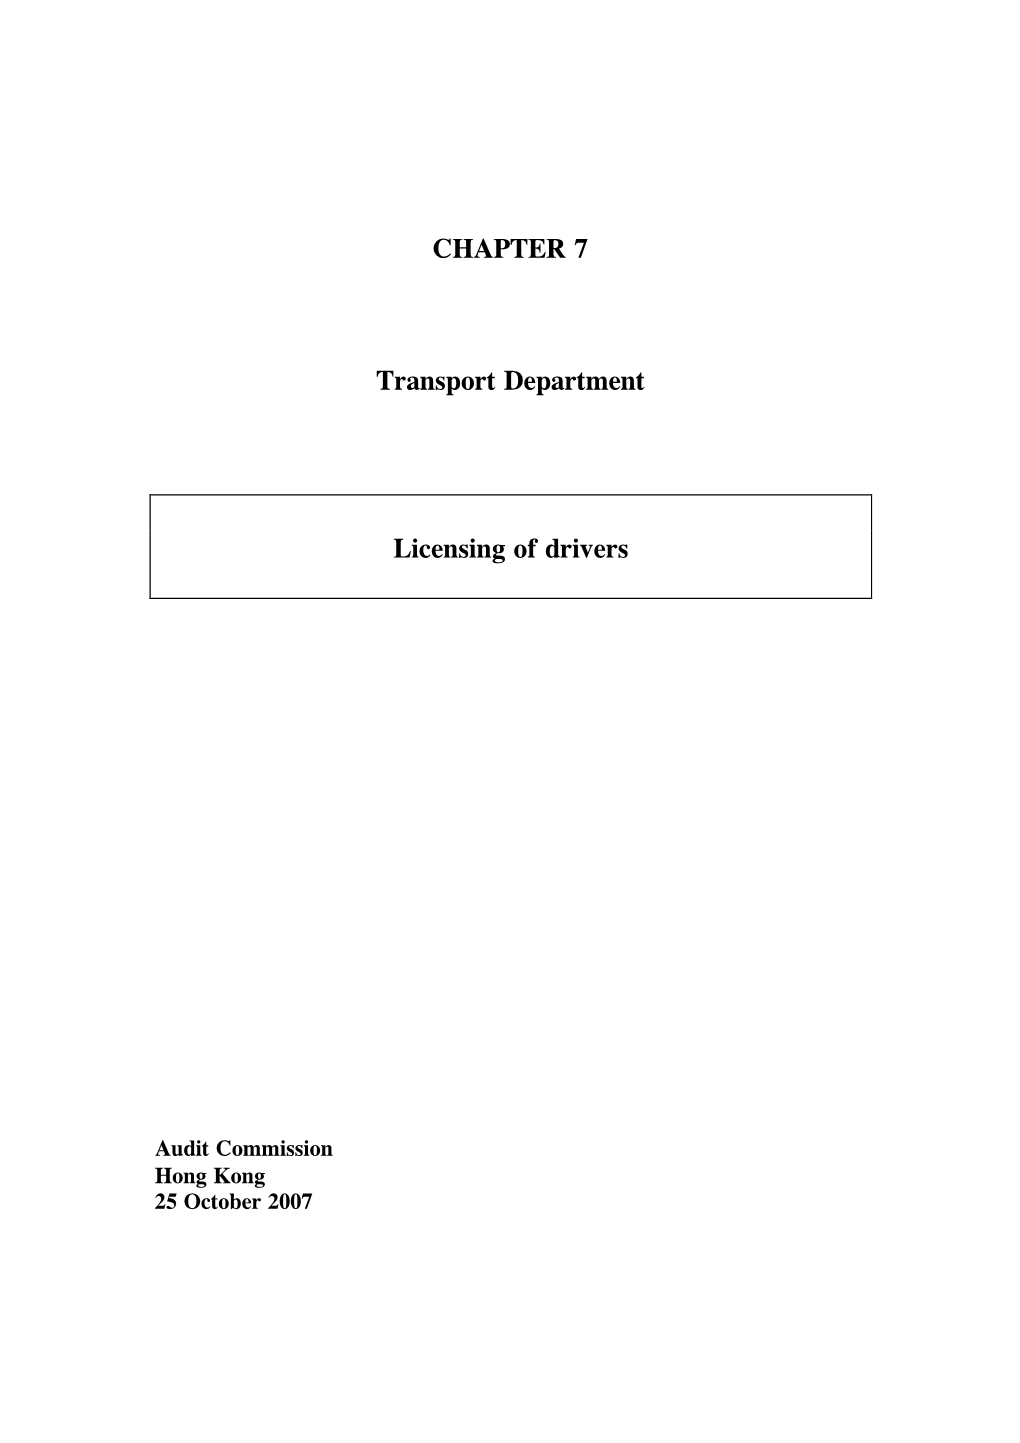 CHAPTER 7 Transport Department Licensing of Drivers